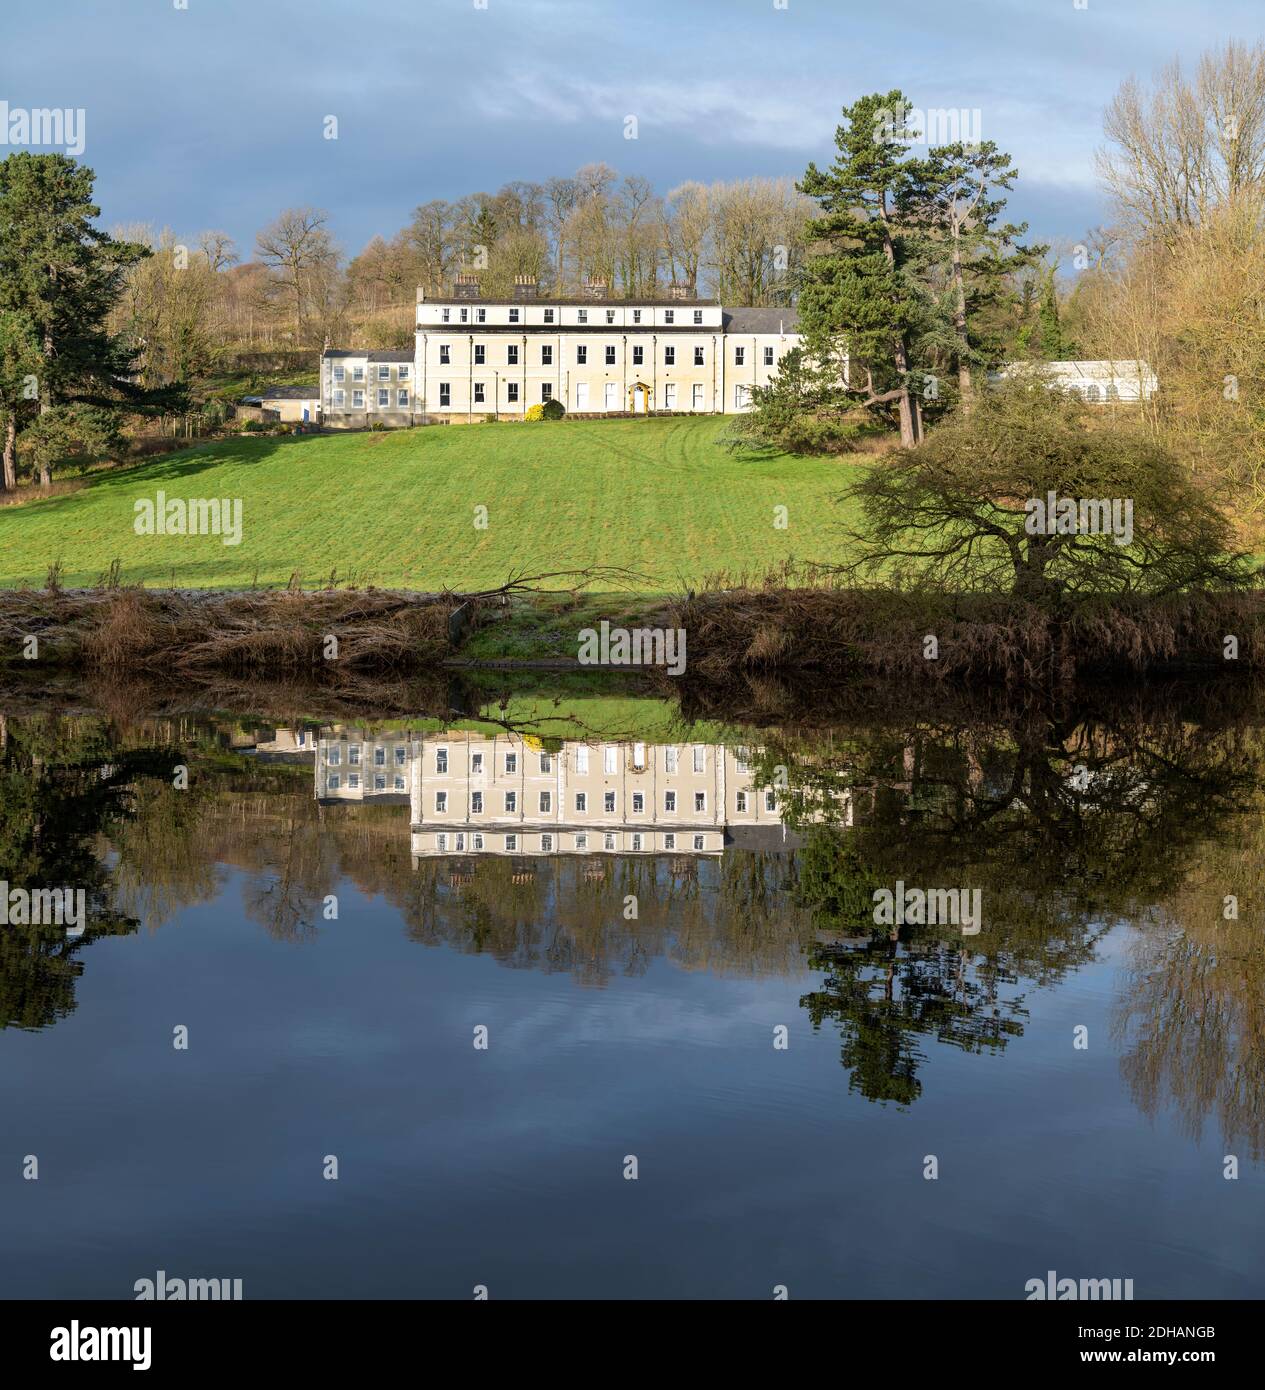 Waddow Hall, Grade II listed building, Girl Guides centre on the banks of the River Ribble, Clitheroe, Lancashire, UK. Stock Photo